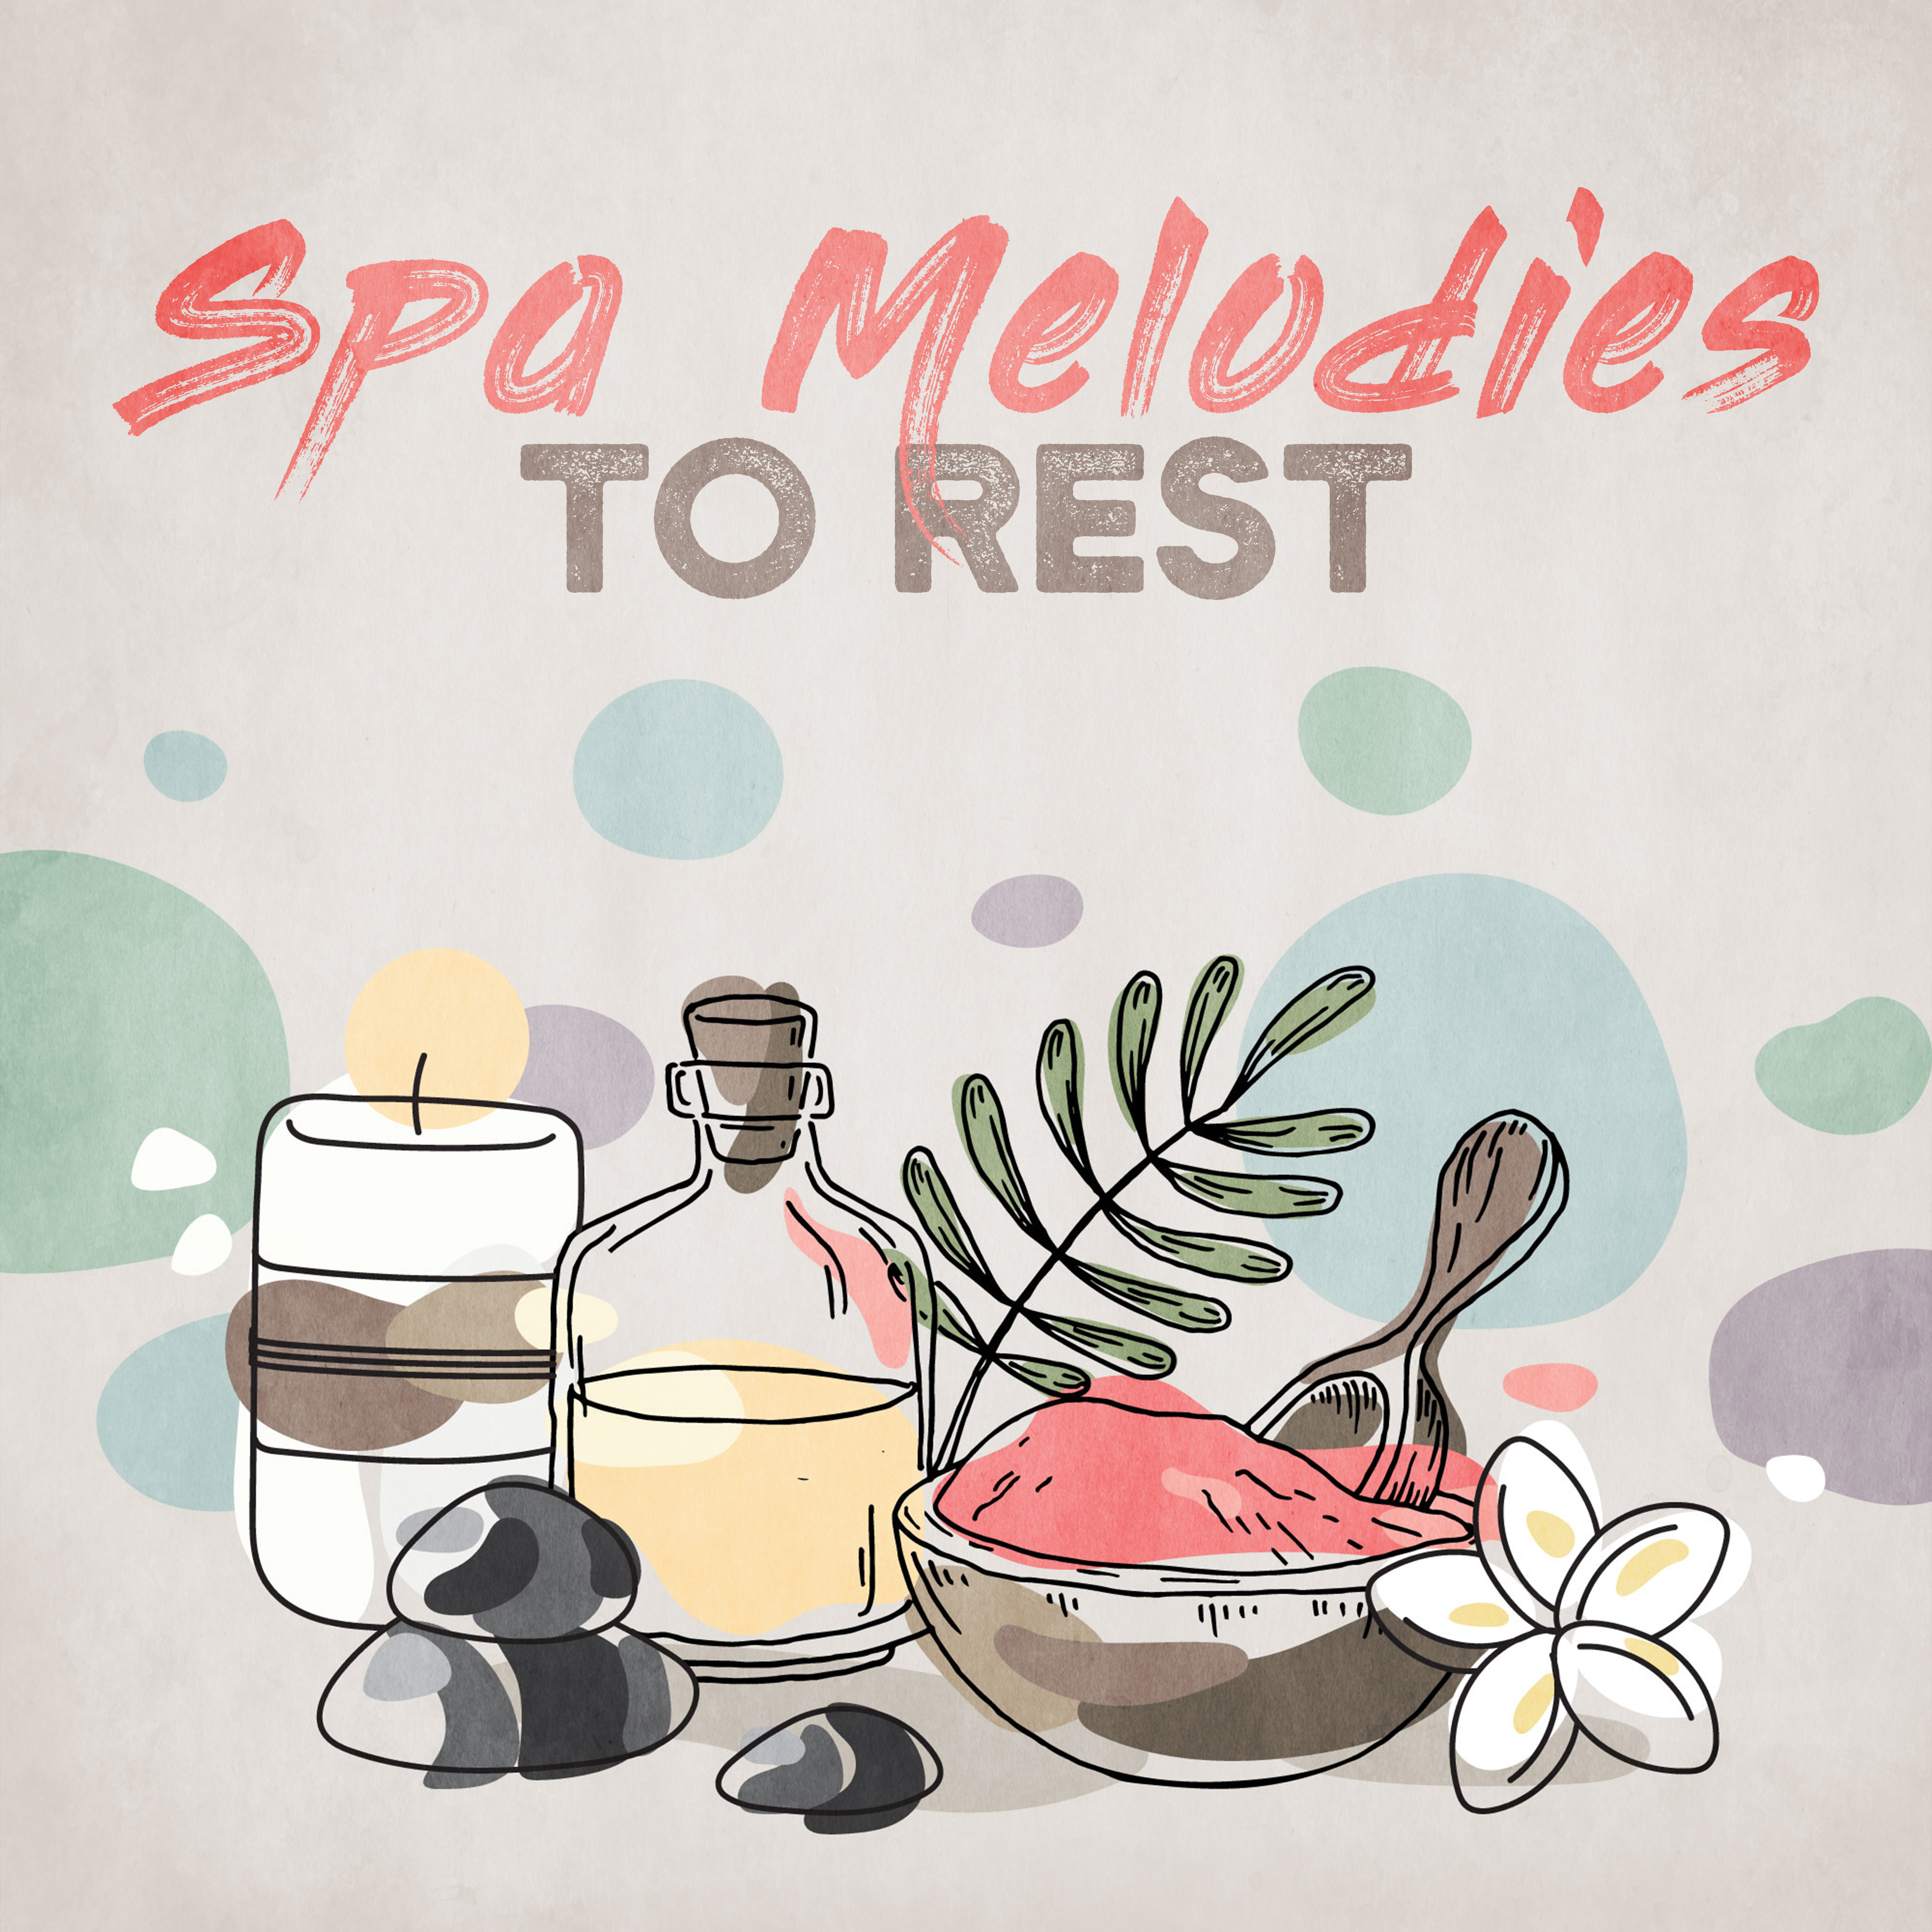 Spa Melodies to Rest